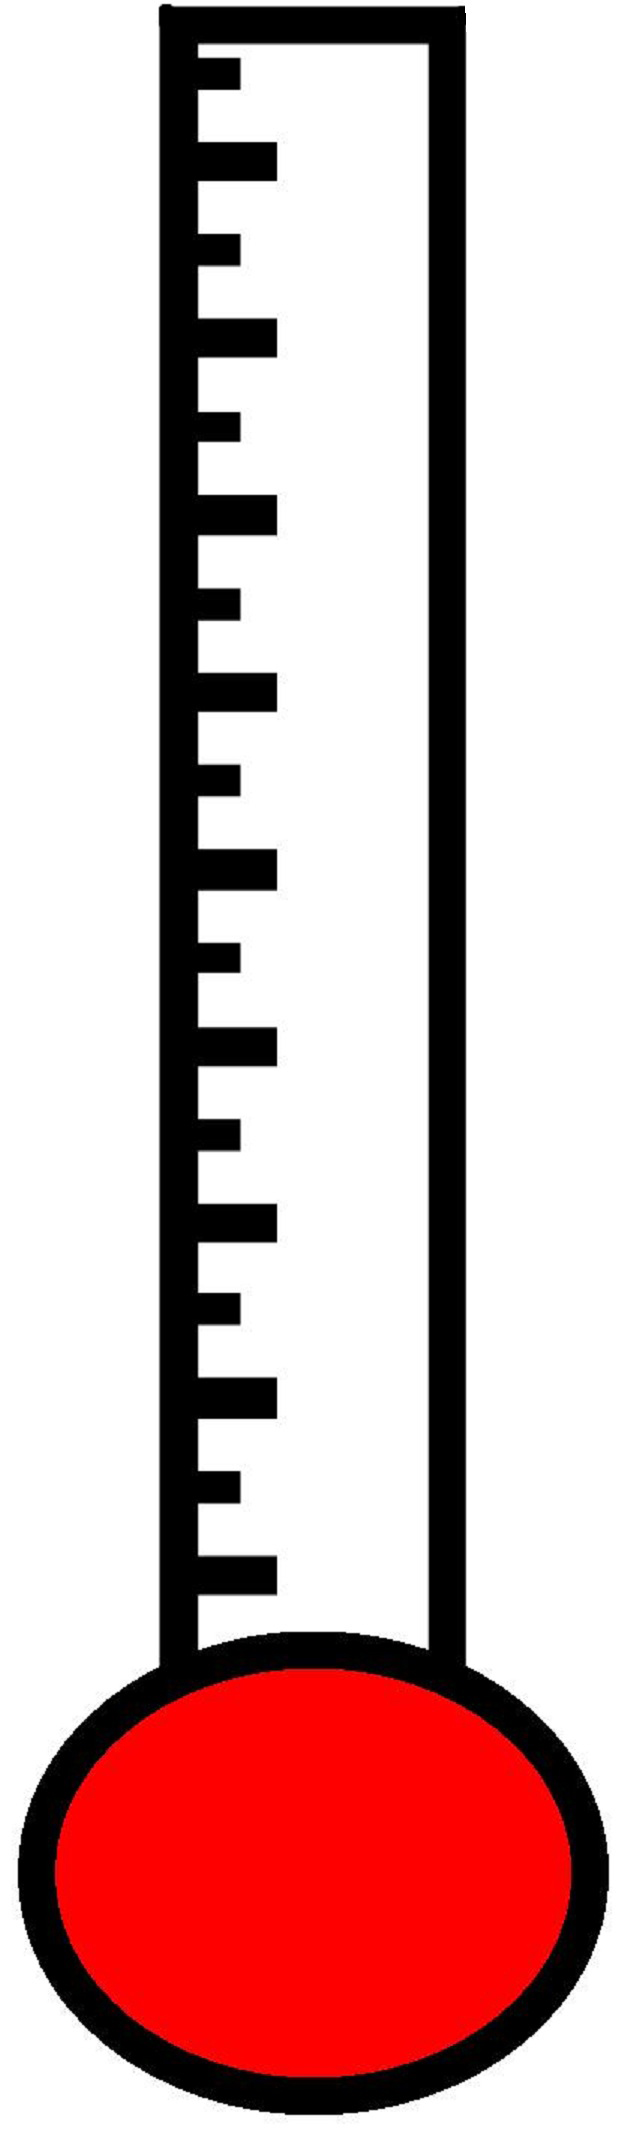 Thermometer Chart Template At Chandooorg I Have Goal - ClipArt ...